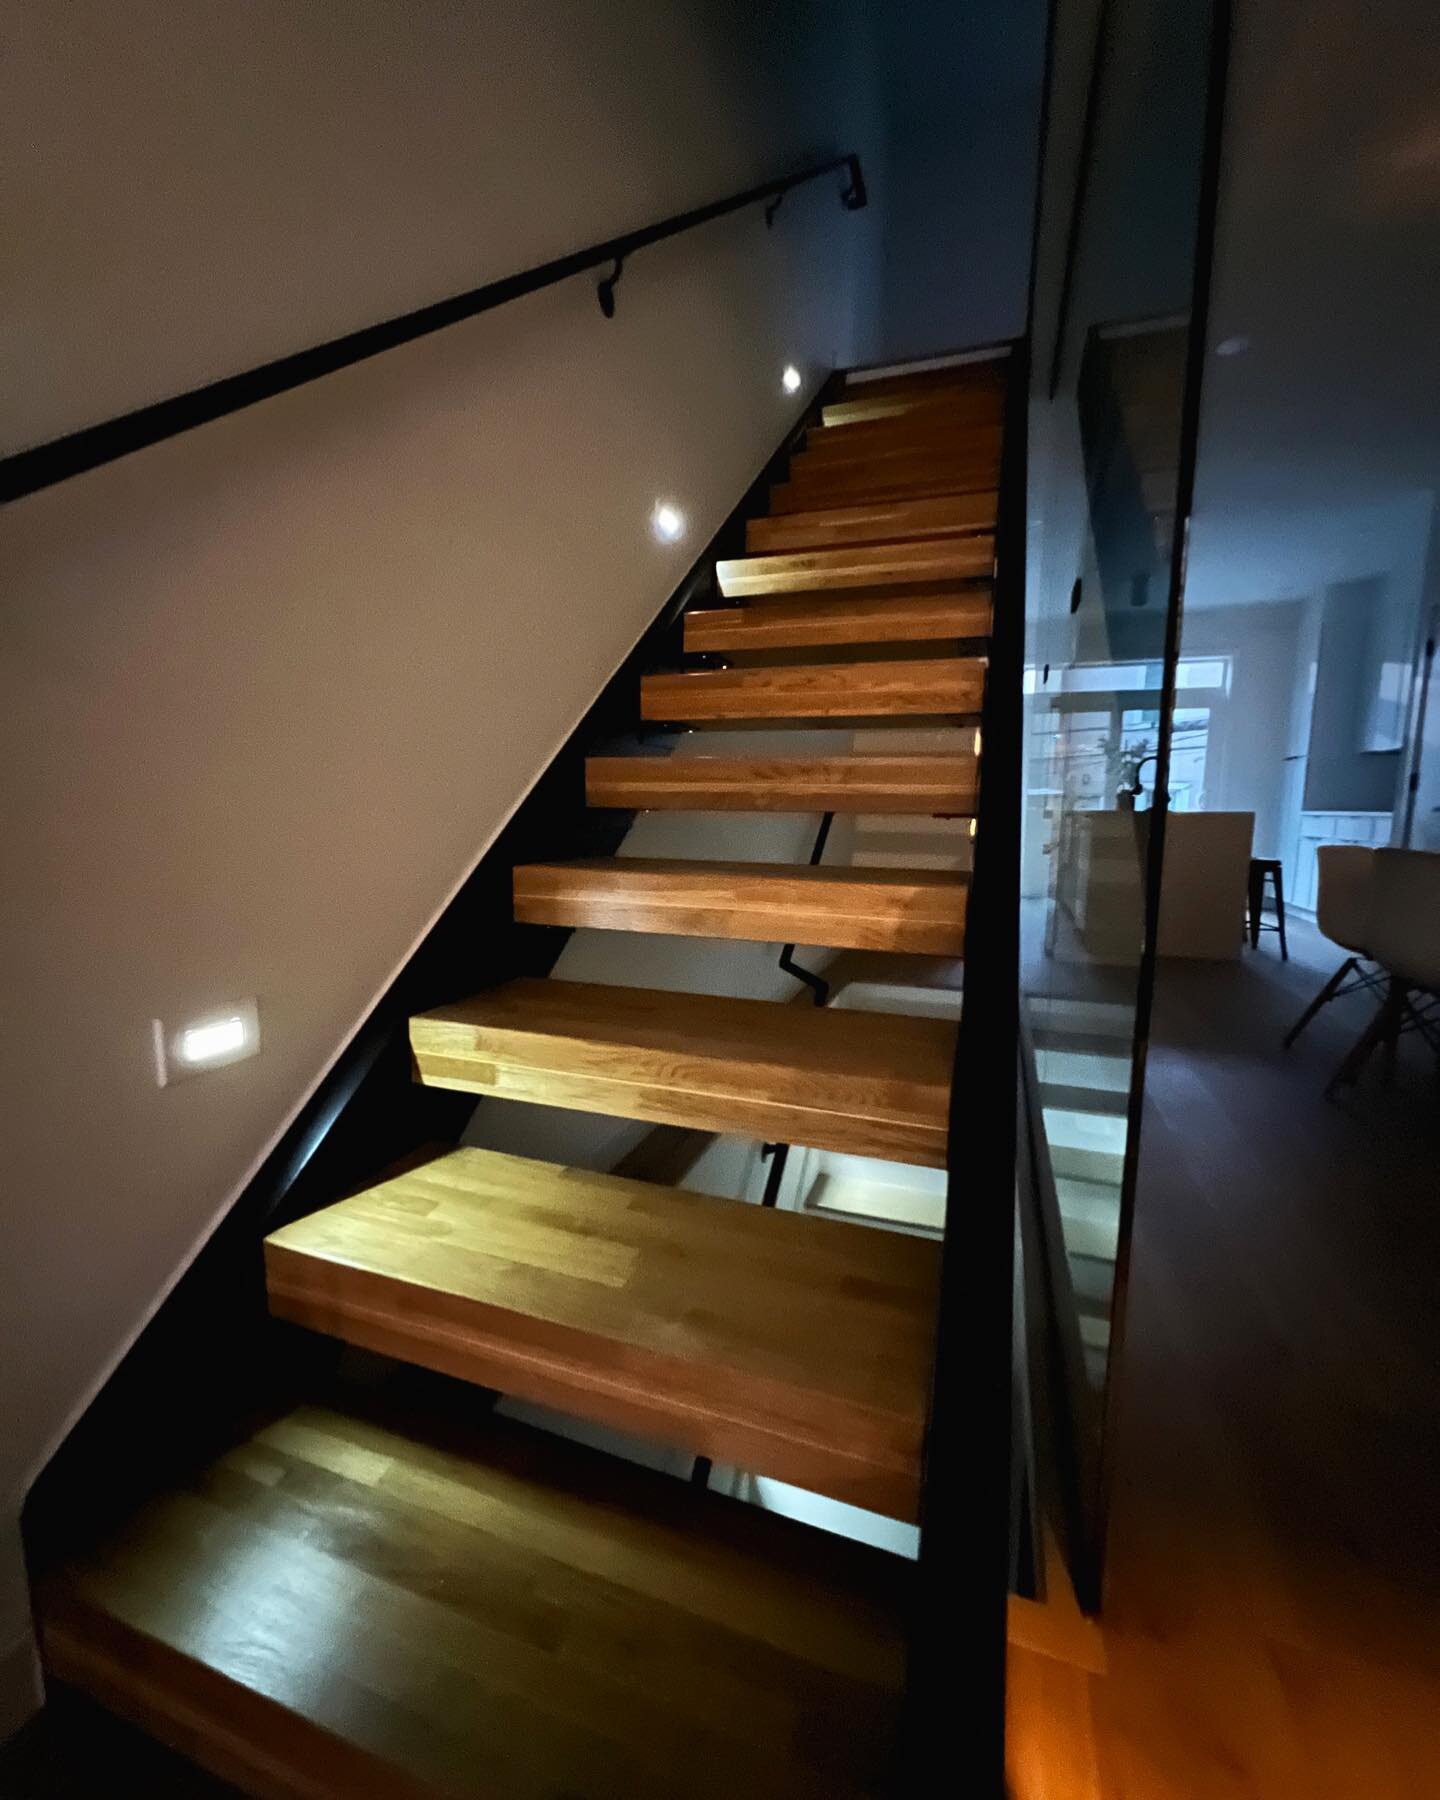 Don&rsquo;t be trippin&rsquo;

Dimly illuminate your stairwell 💡
#stairlighting #electric #makeyourspacebright #weinsteinelectric